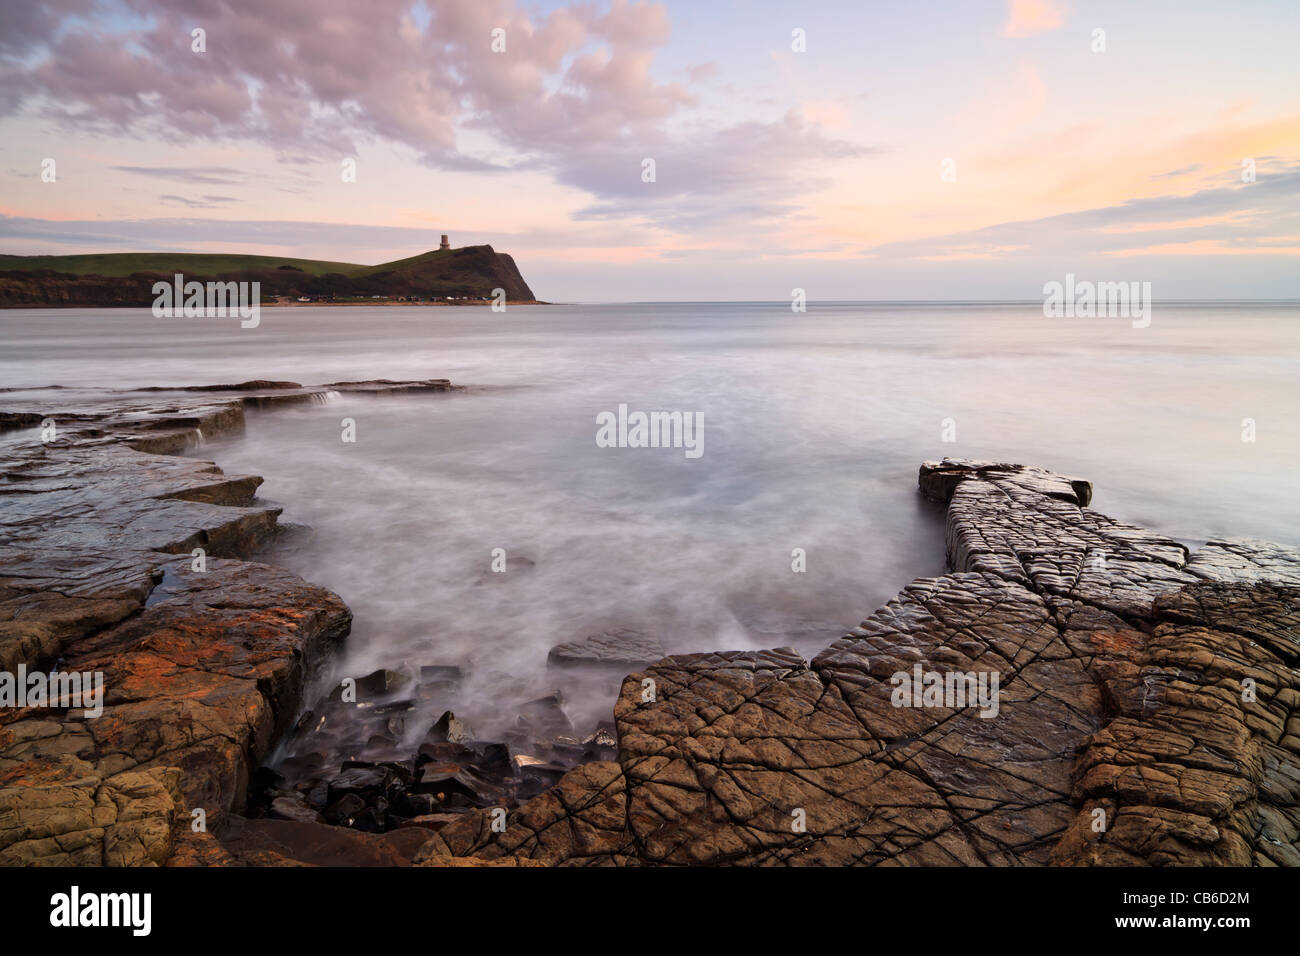 Kimmeridge Bay, Dorset, UK, with Clavell's Tower in the background, at sunset Stock Photo